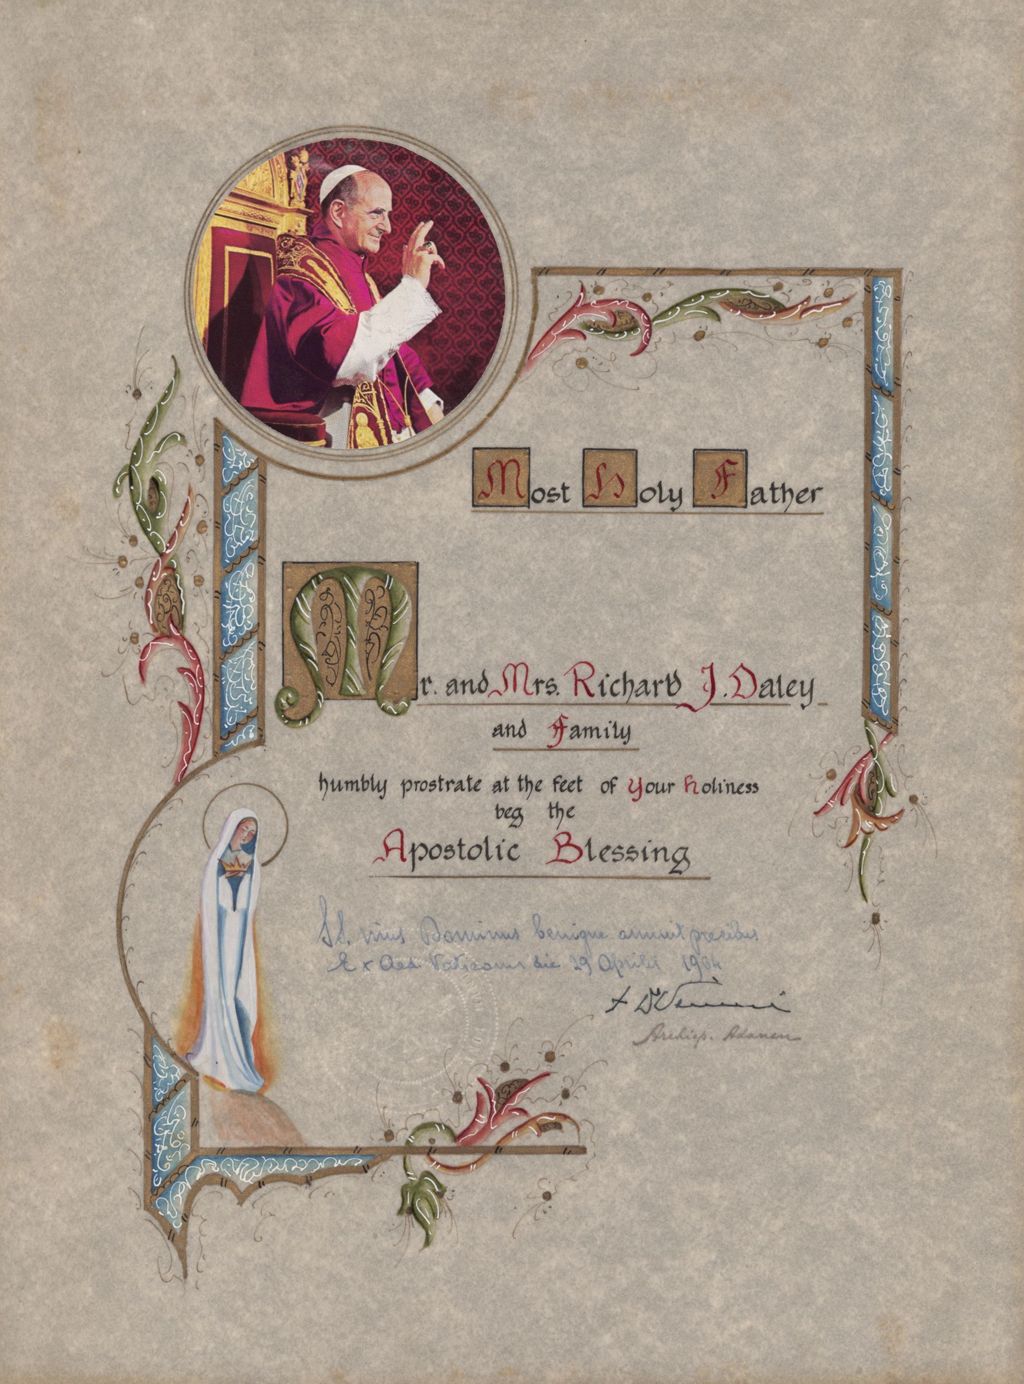 Miniature of Papal blessing parchment from Pope Paul VI for Richard J. Daley and family